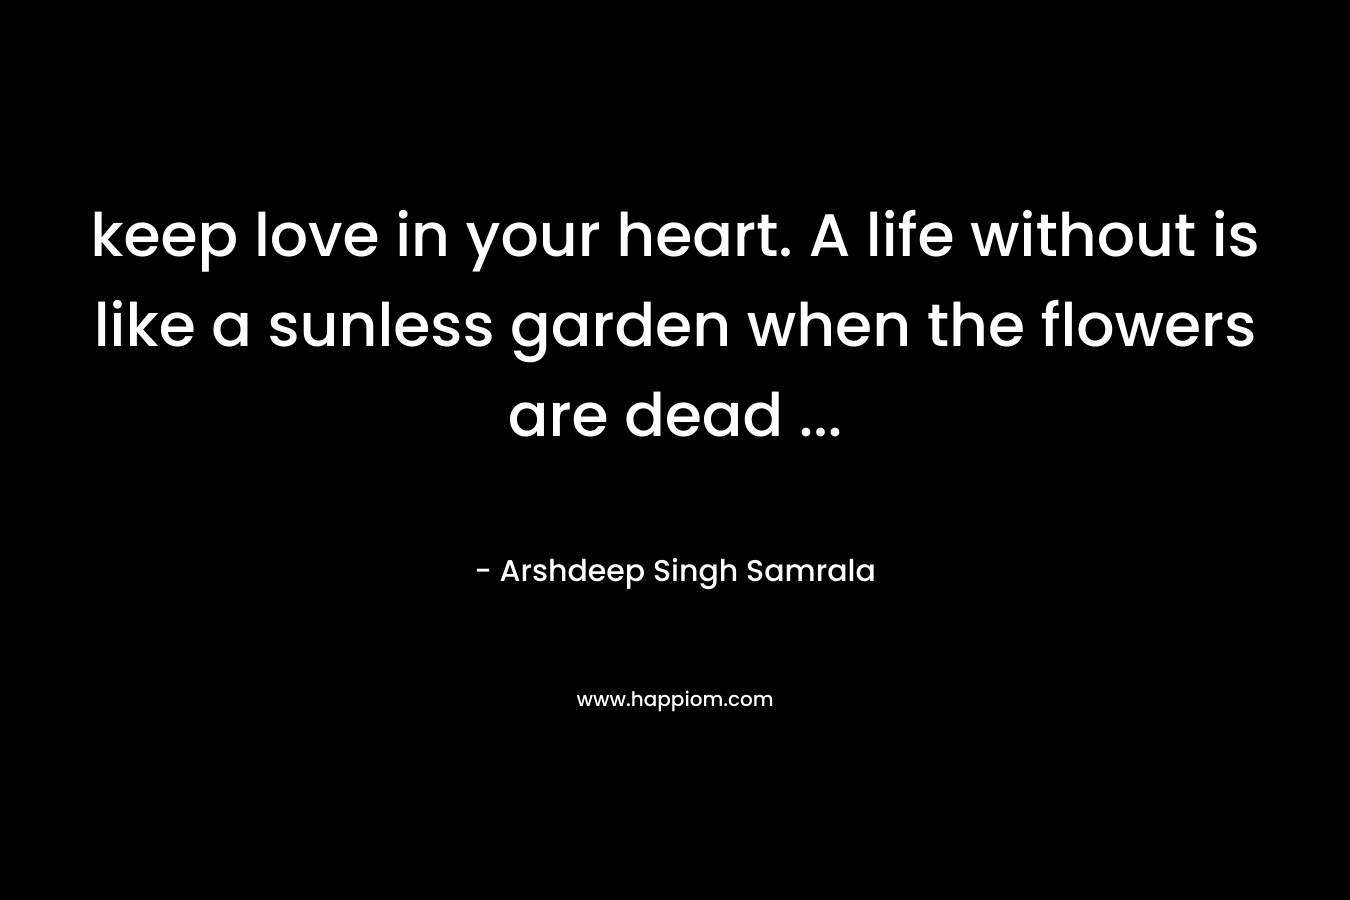 keep love in your heart. A life without is like a sunless garden when the flowers are dead ...